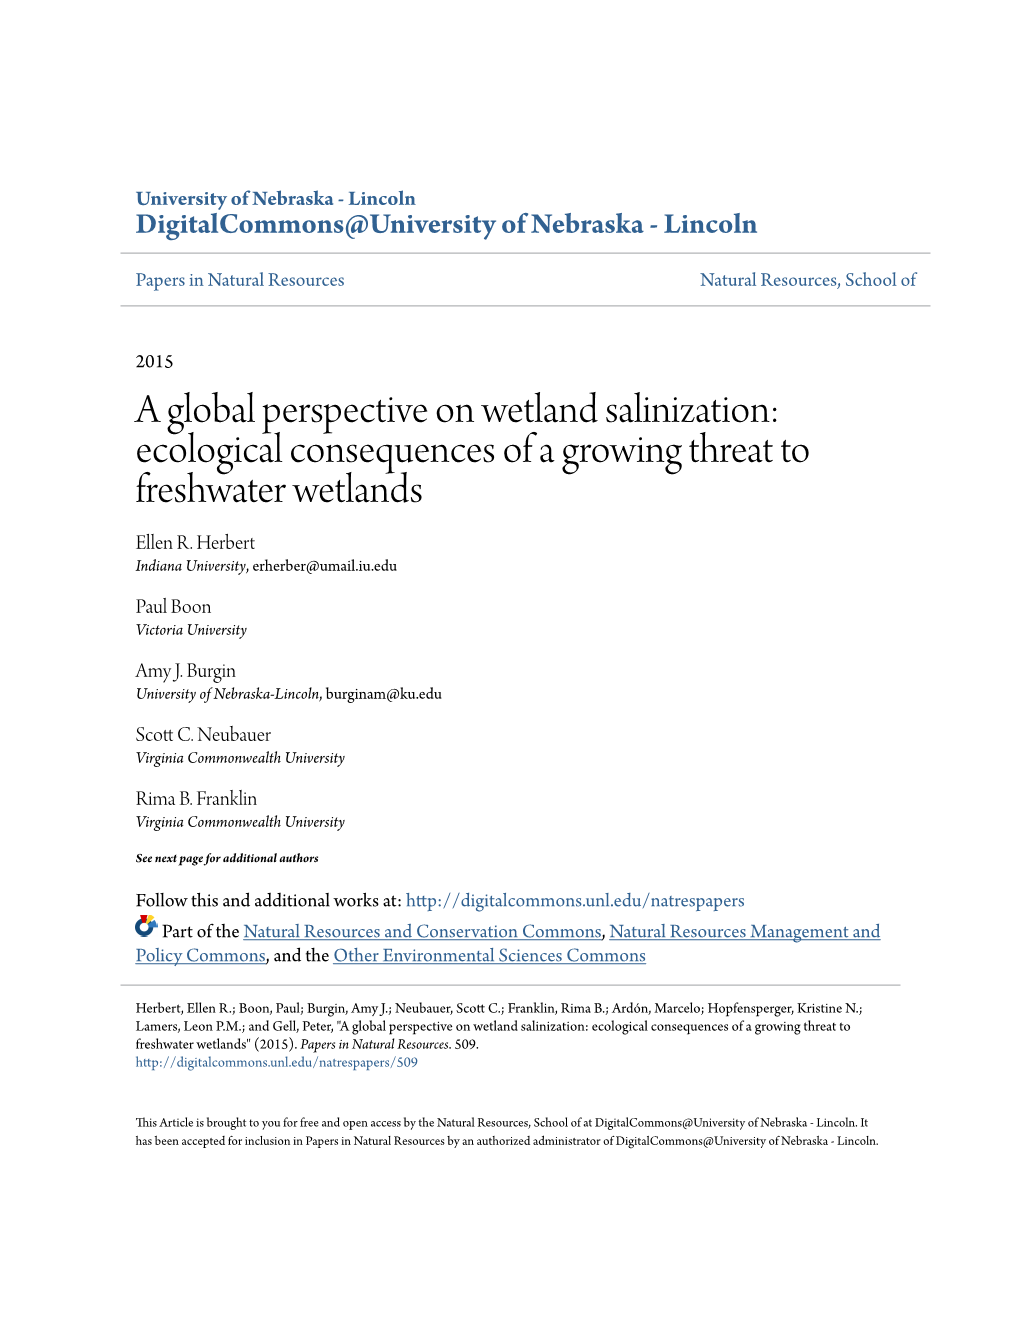 Ecological Consequences of a Growing Threat to Freshwater Wetlands Ellen R